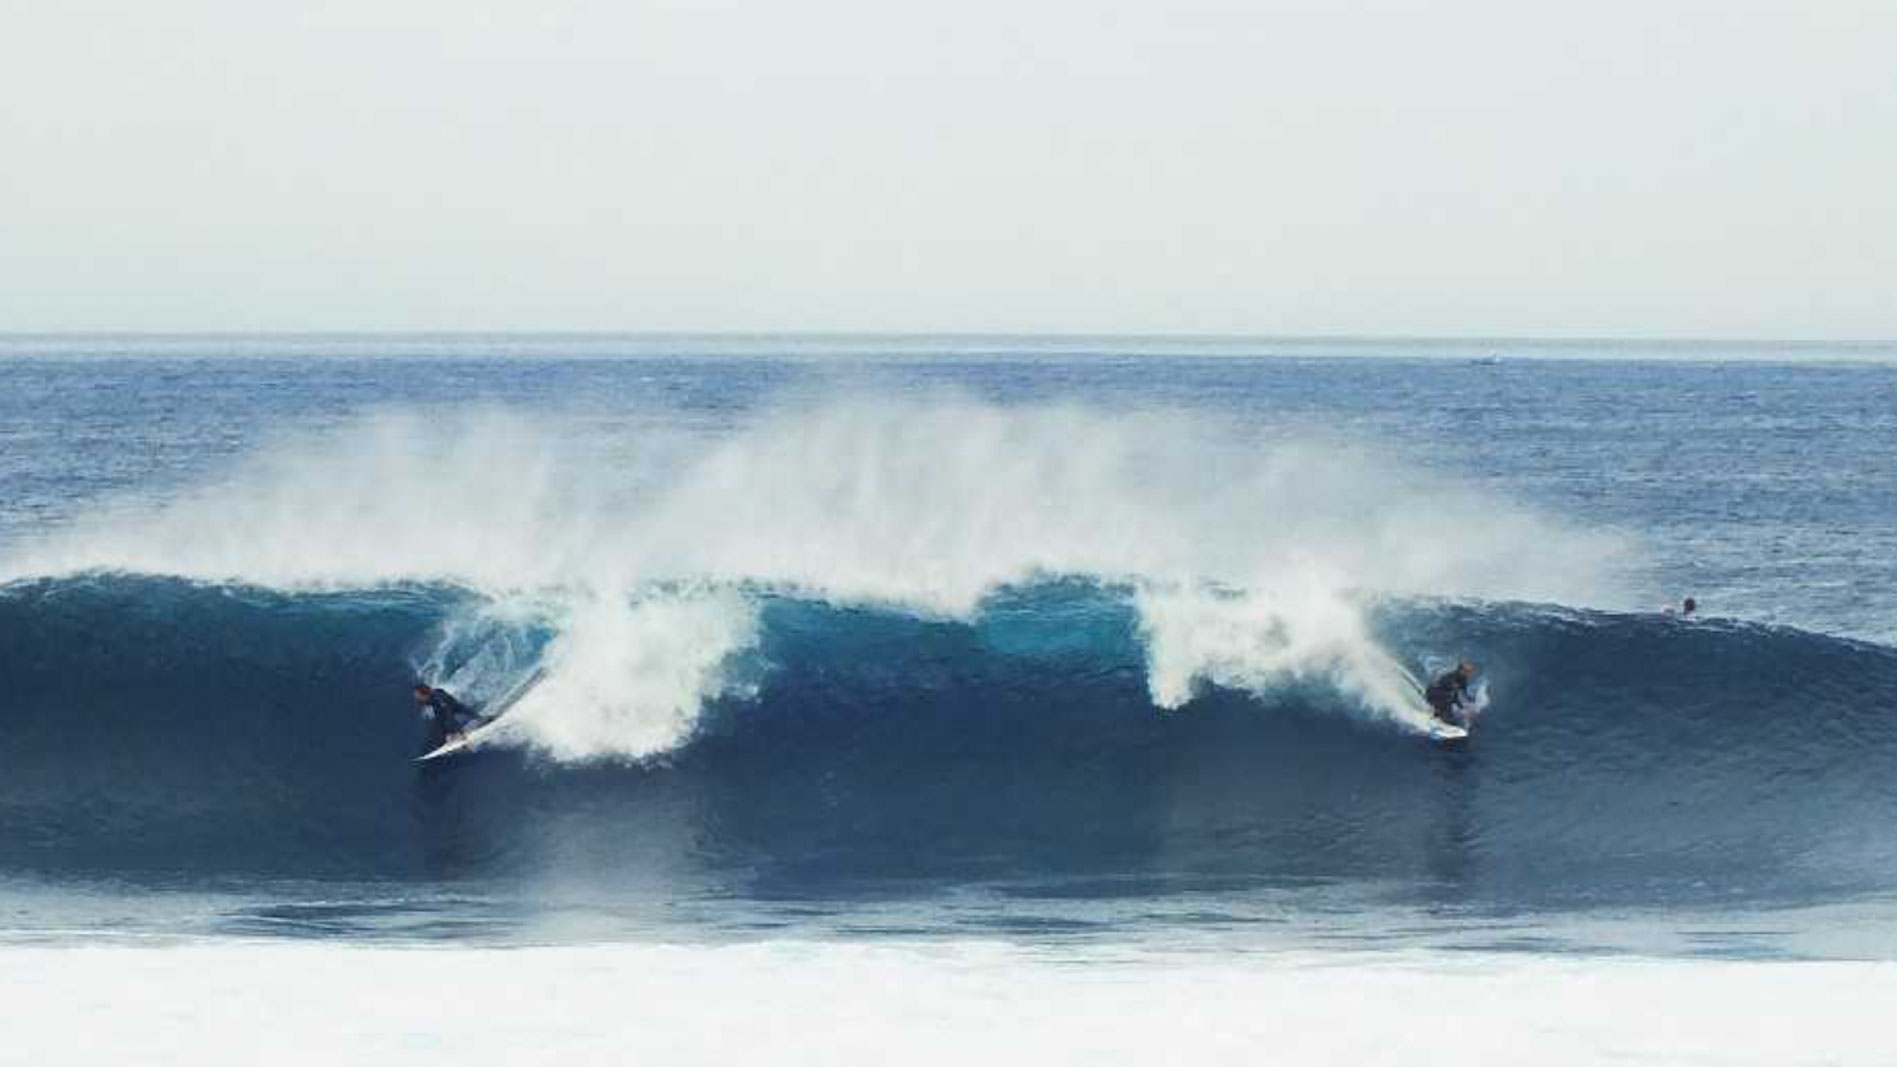 Two surfers riding the same wave, following the surfing etiquette